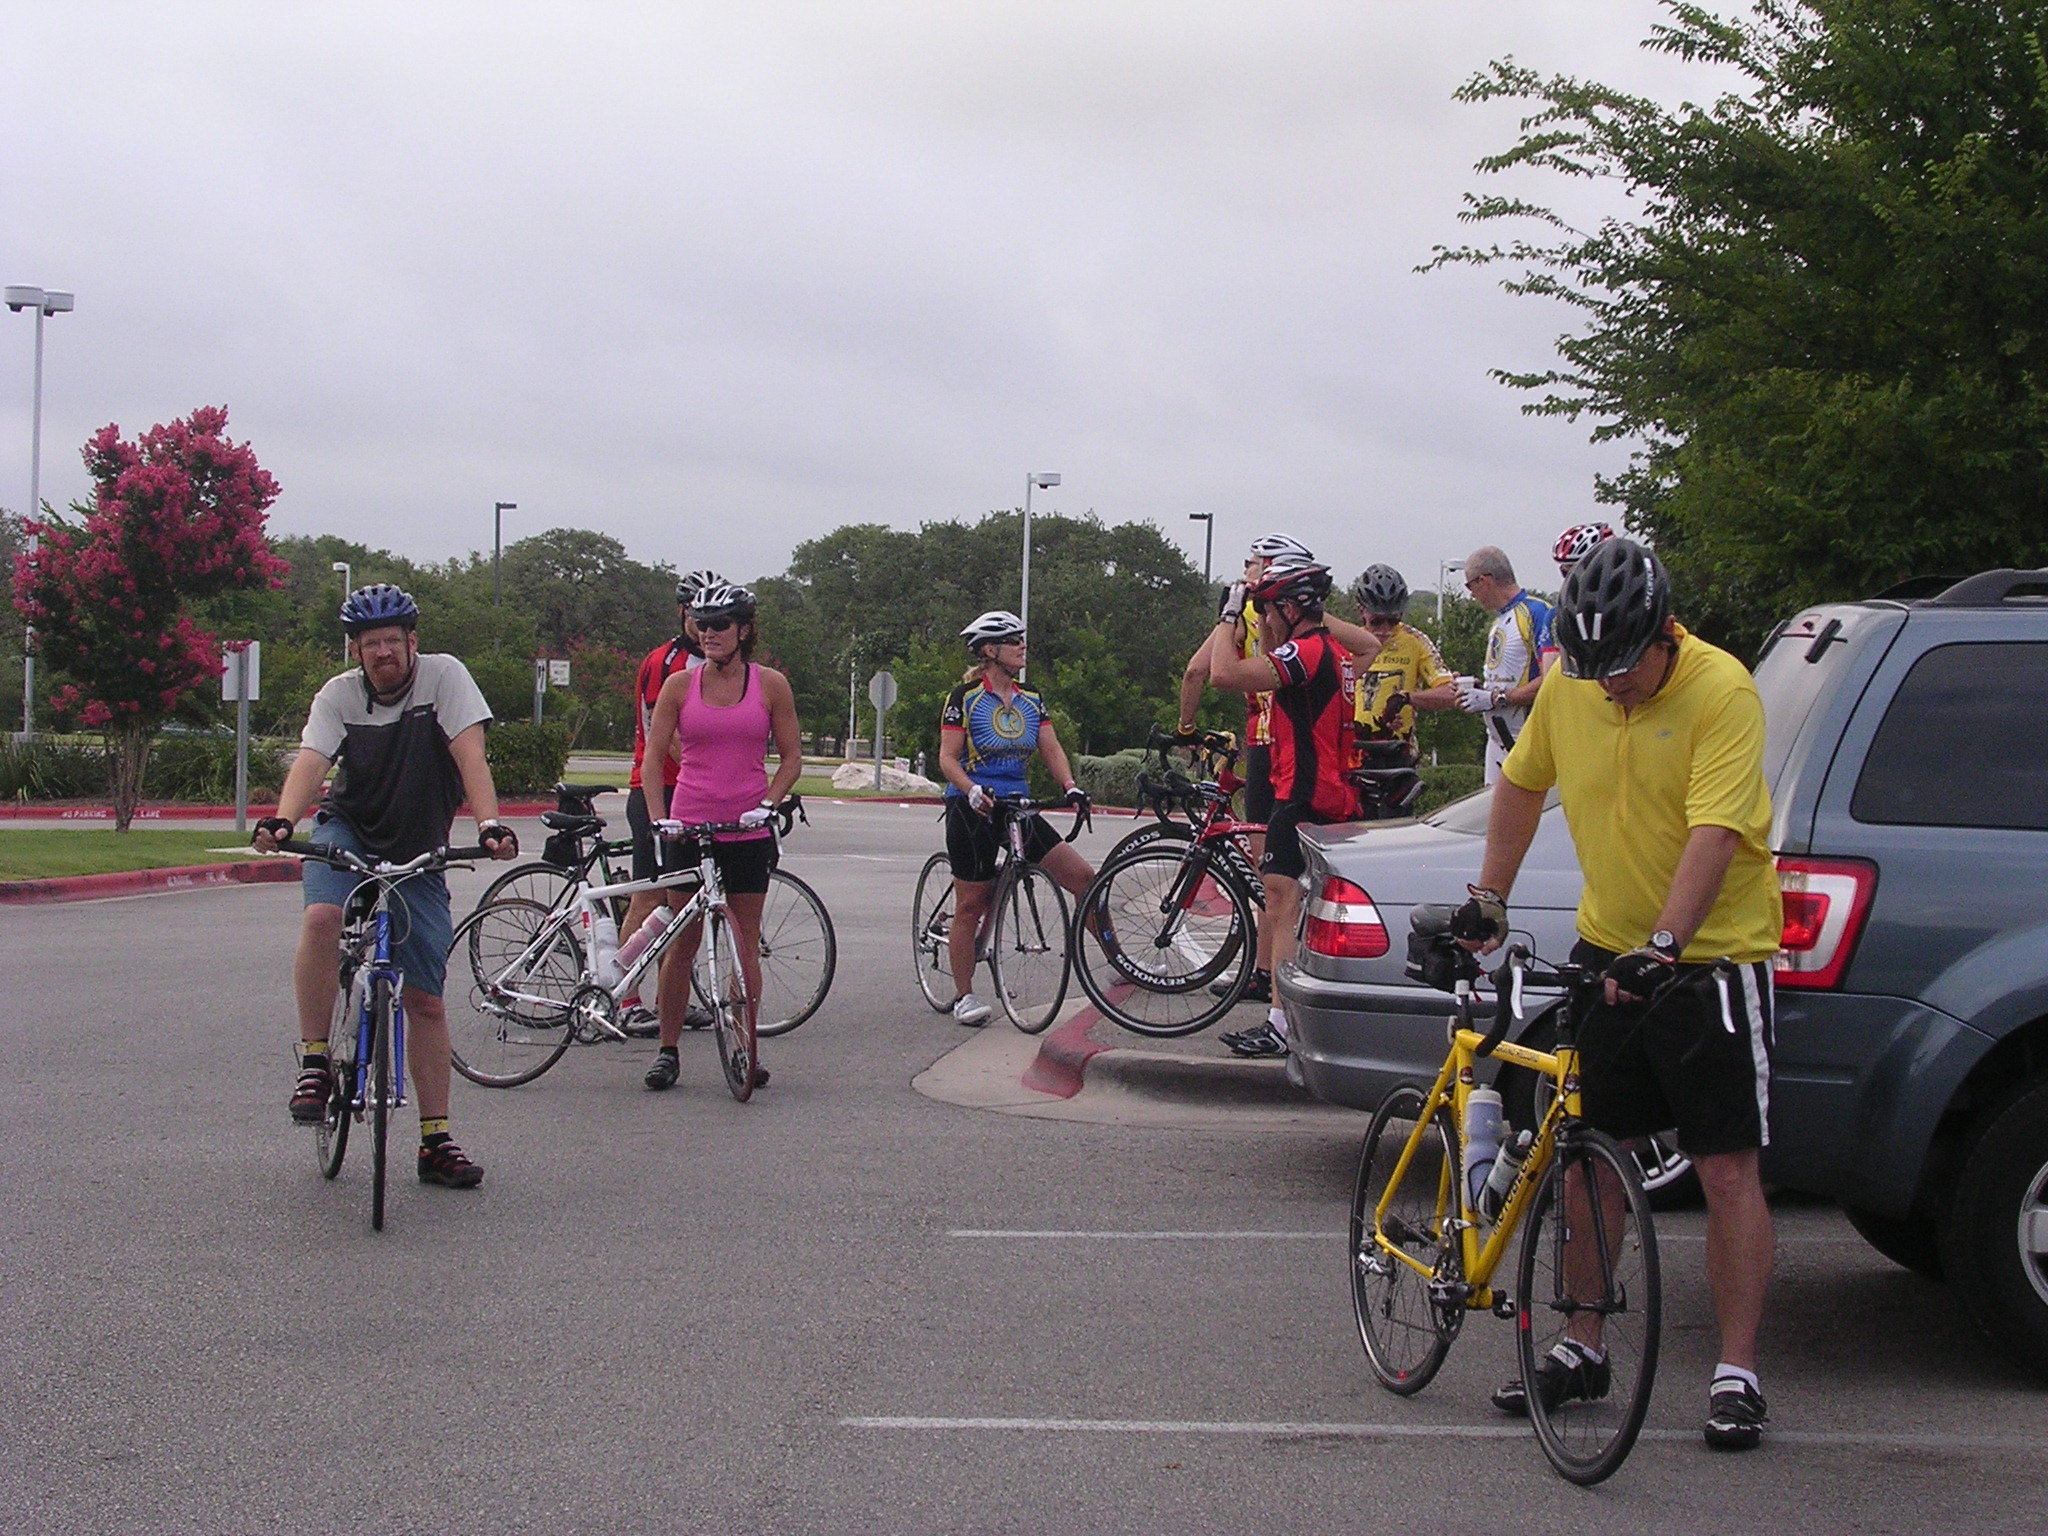 Riders mill around before the start of one of our club rides.